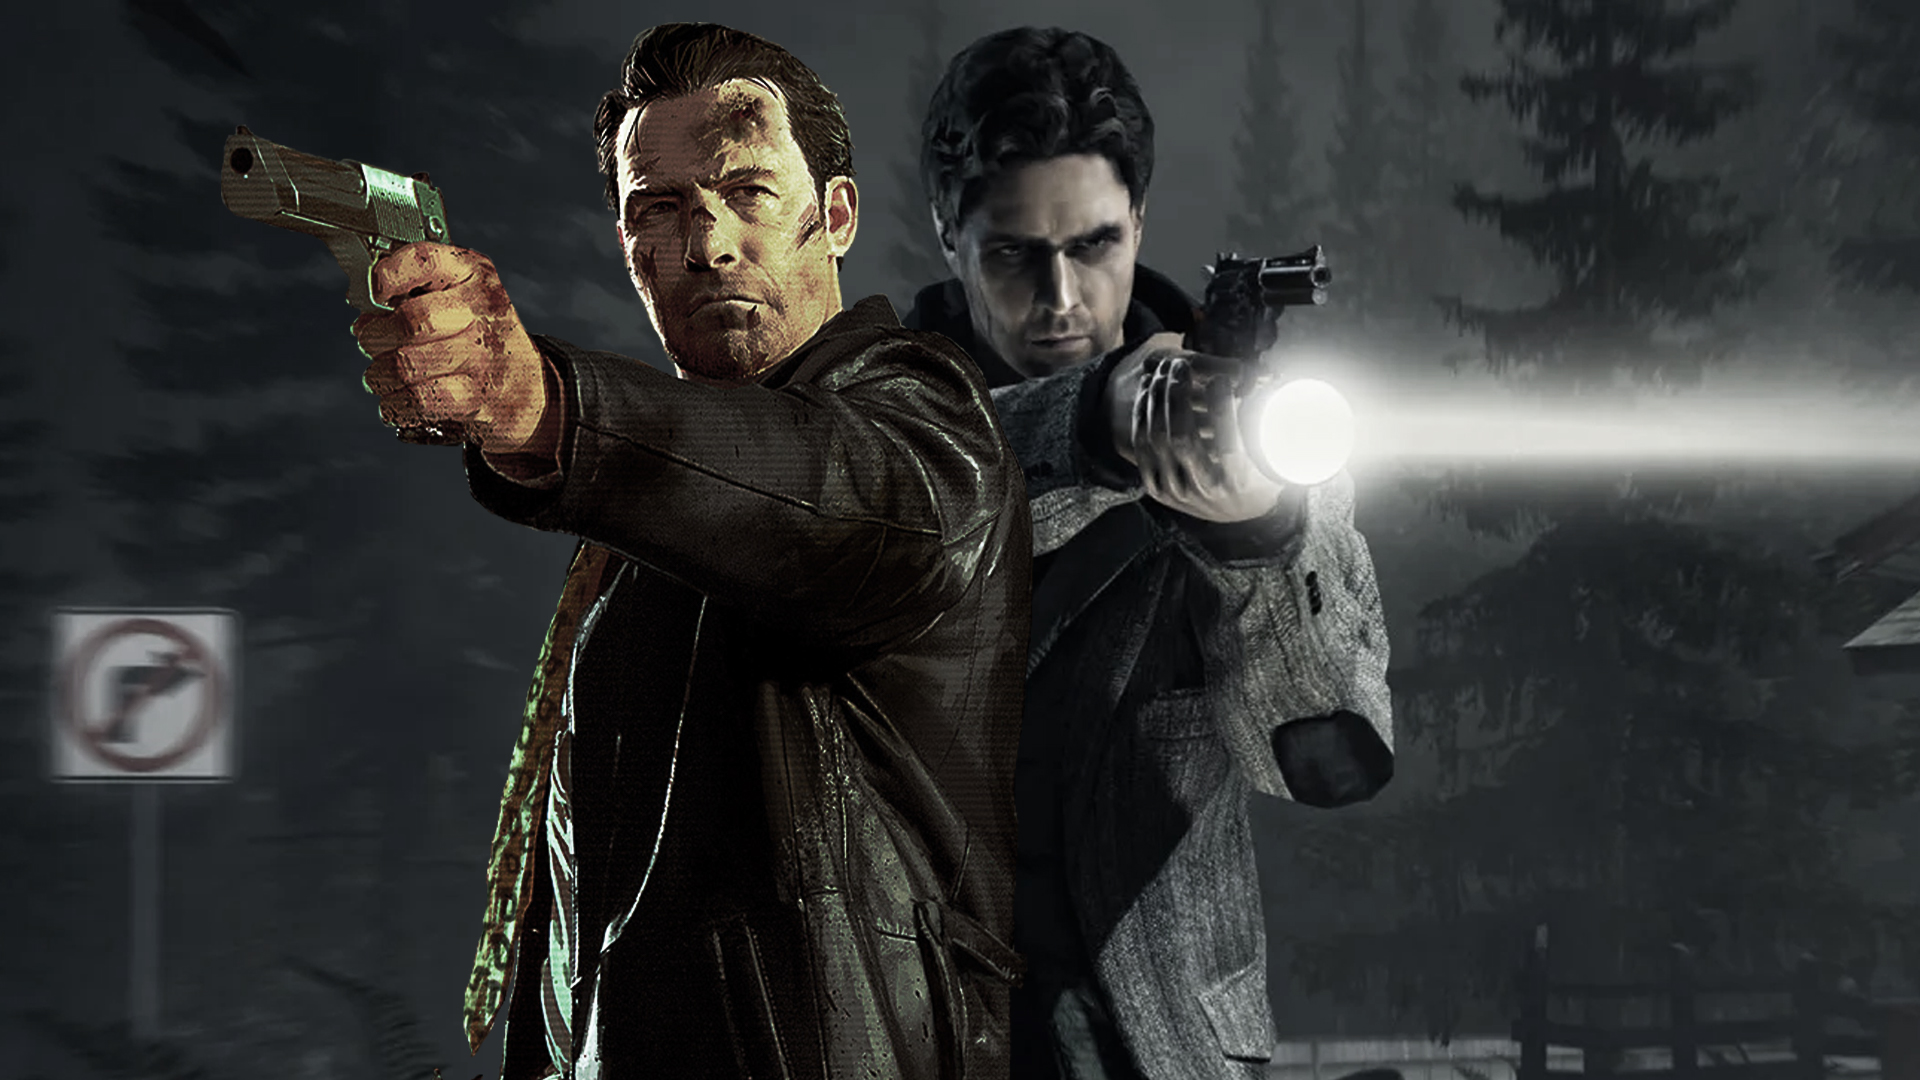 What I Want To See In The Max Payne Remakes